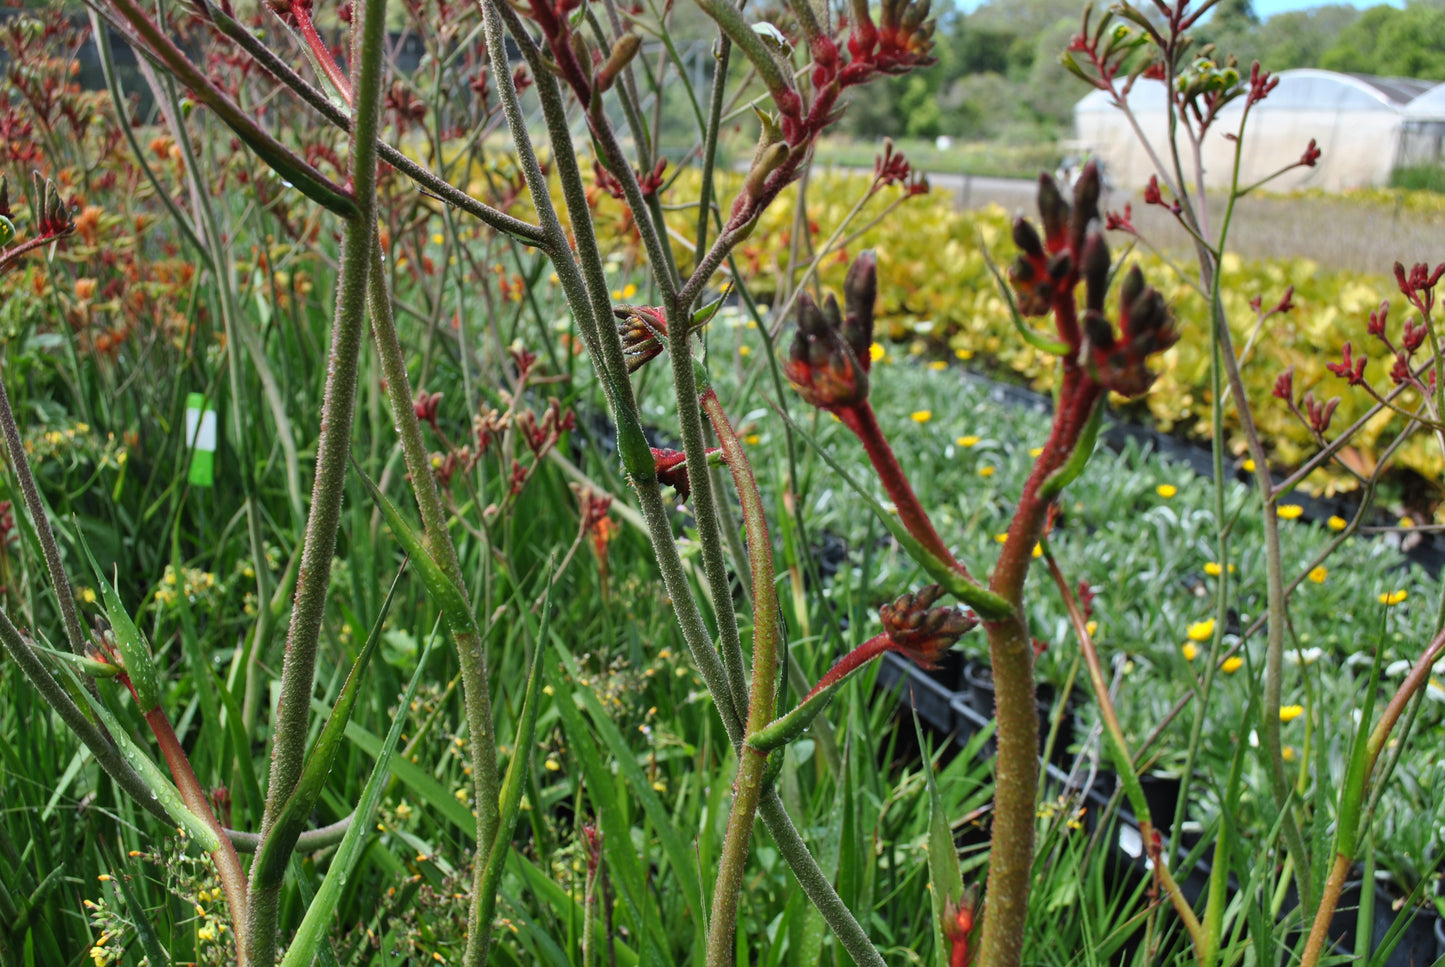 Many red flowers and green leaves of the kangaroo paw